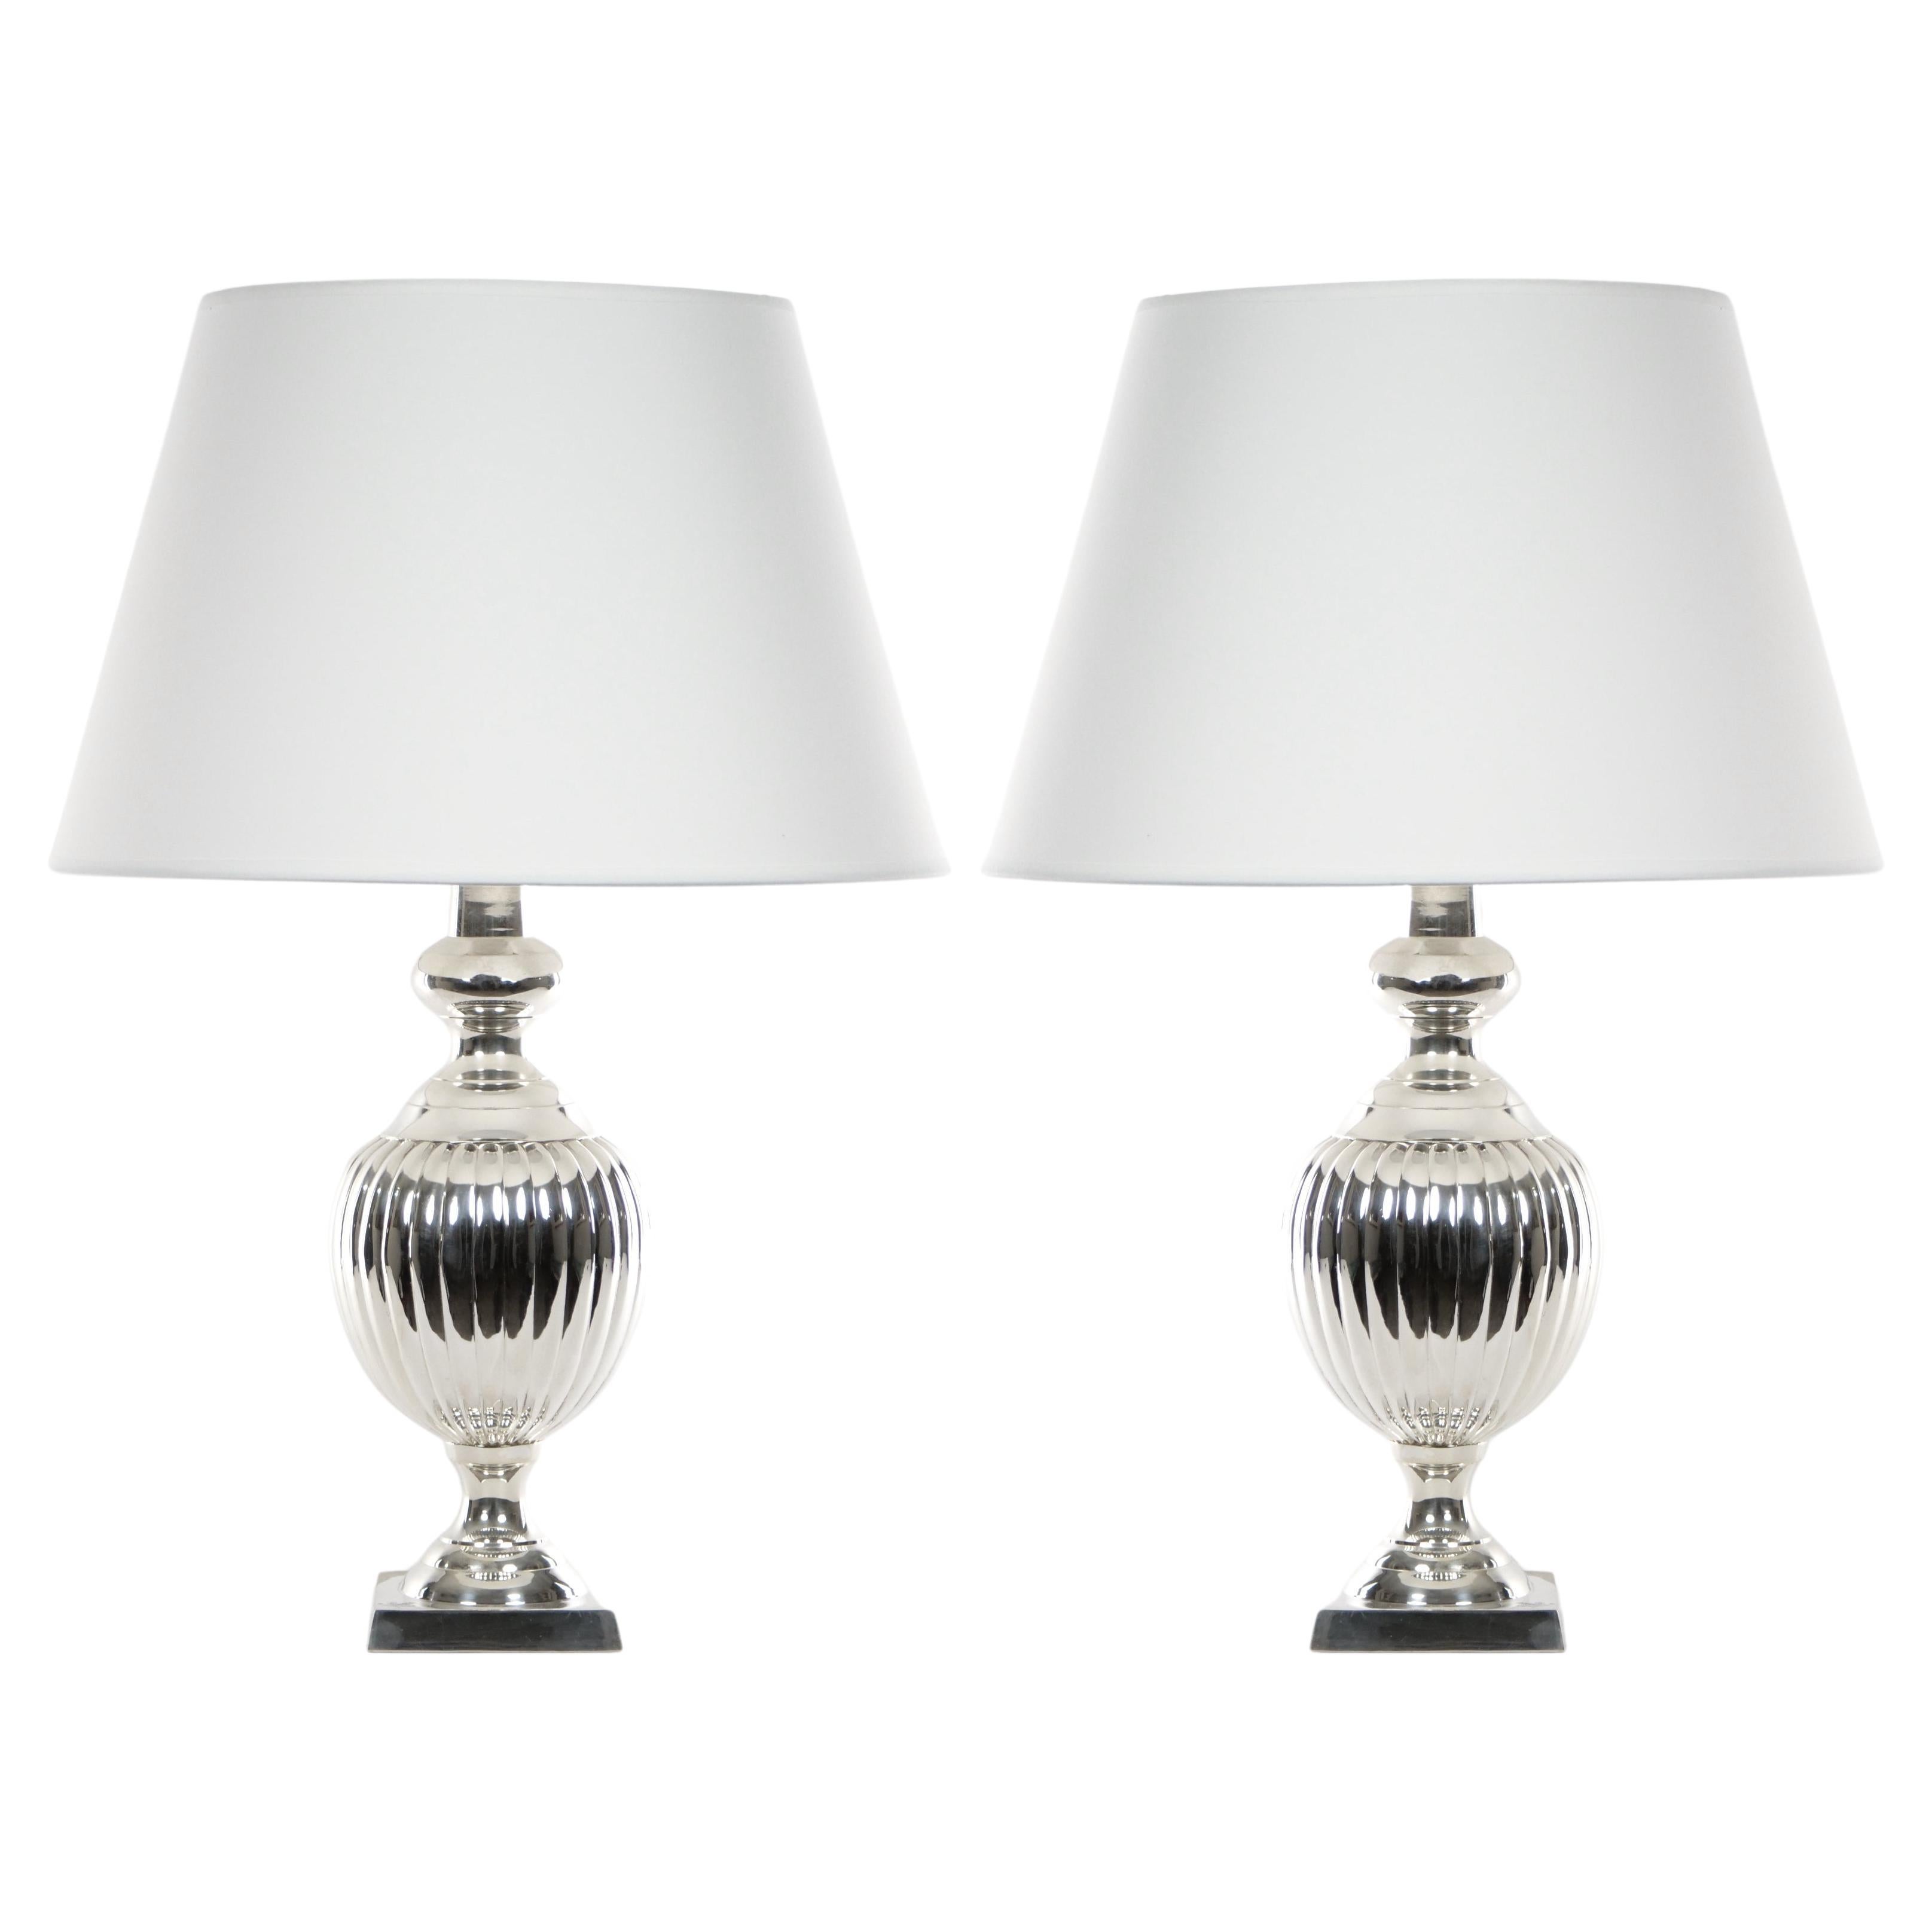 English Pair Mid-20th Century Silver Plate Table Lamp